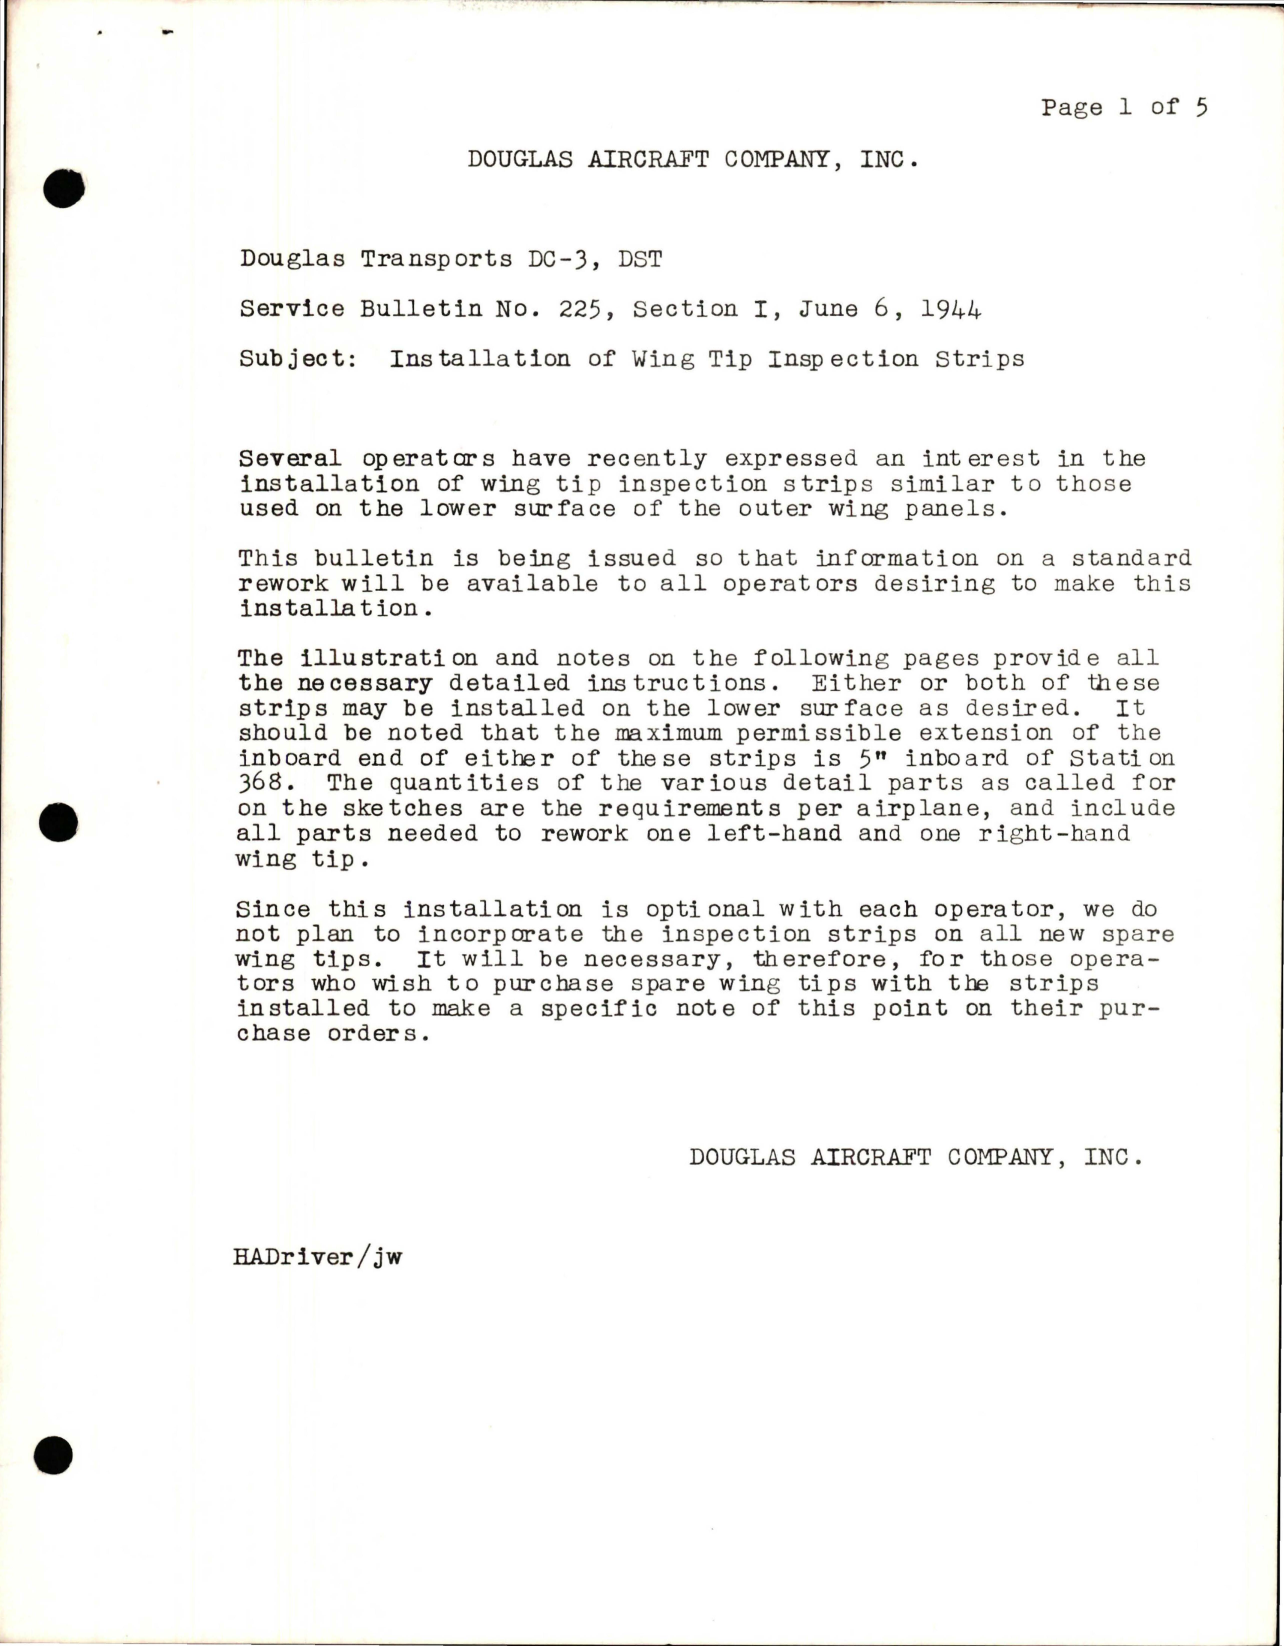 Sample page 1 from AirCorps Library document: Installation of Wing Tip Inspection Strips